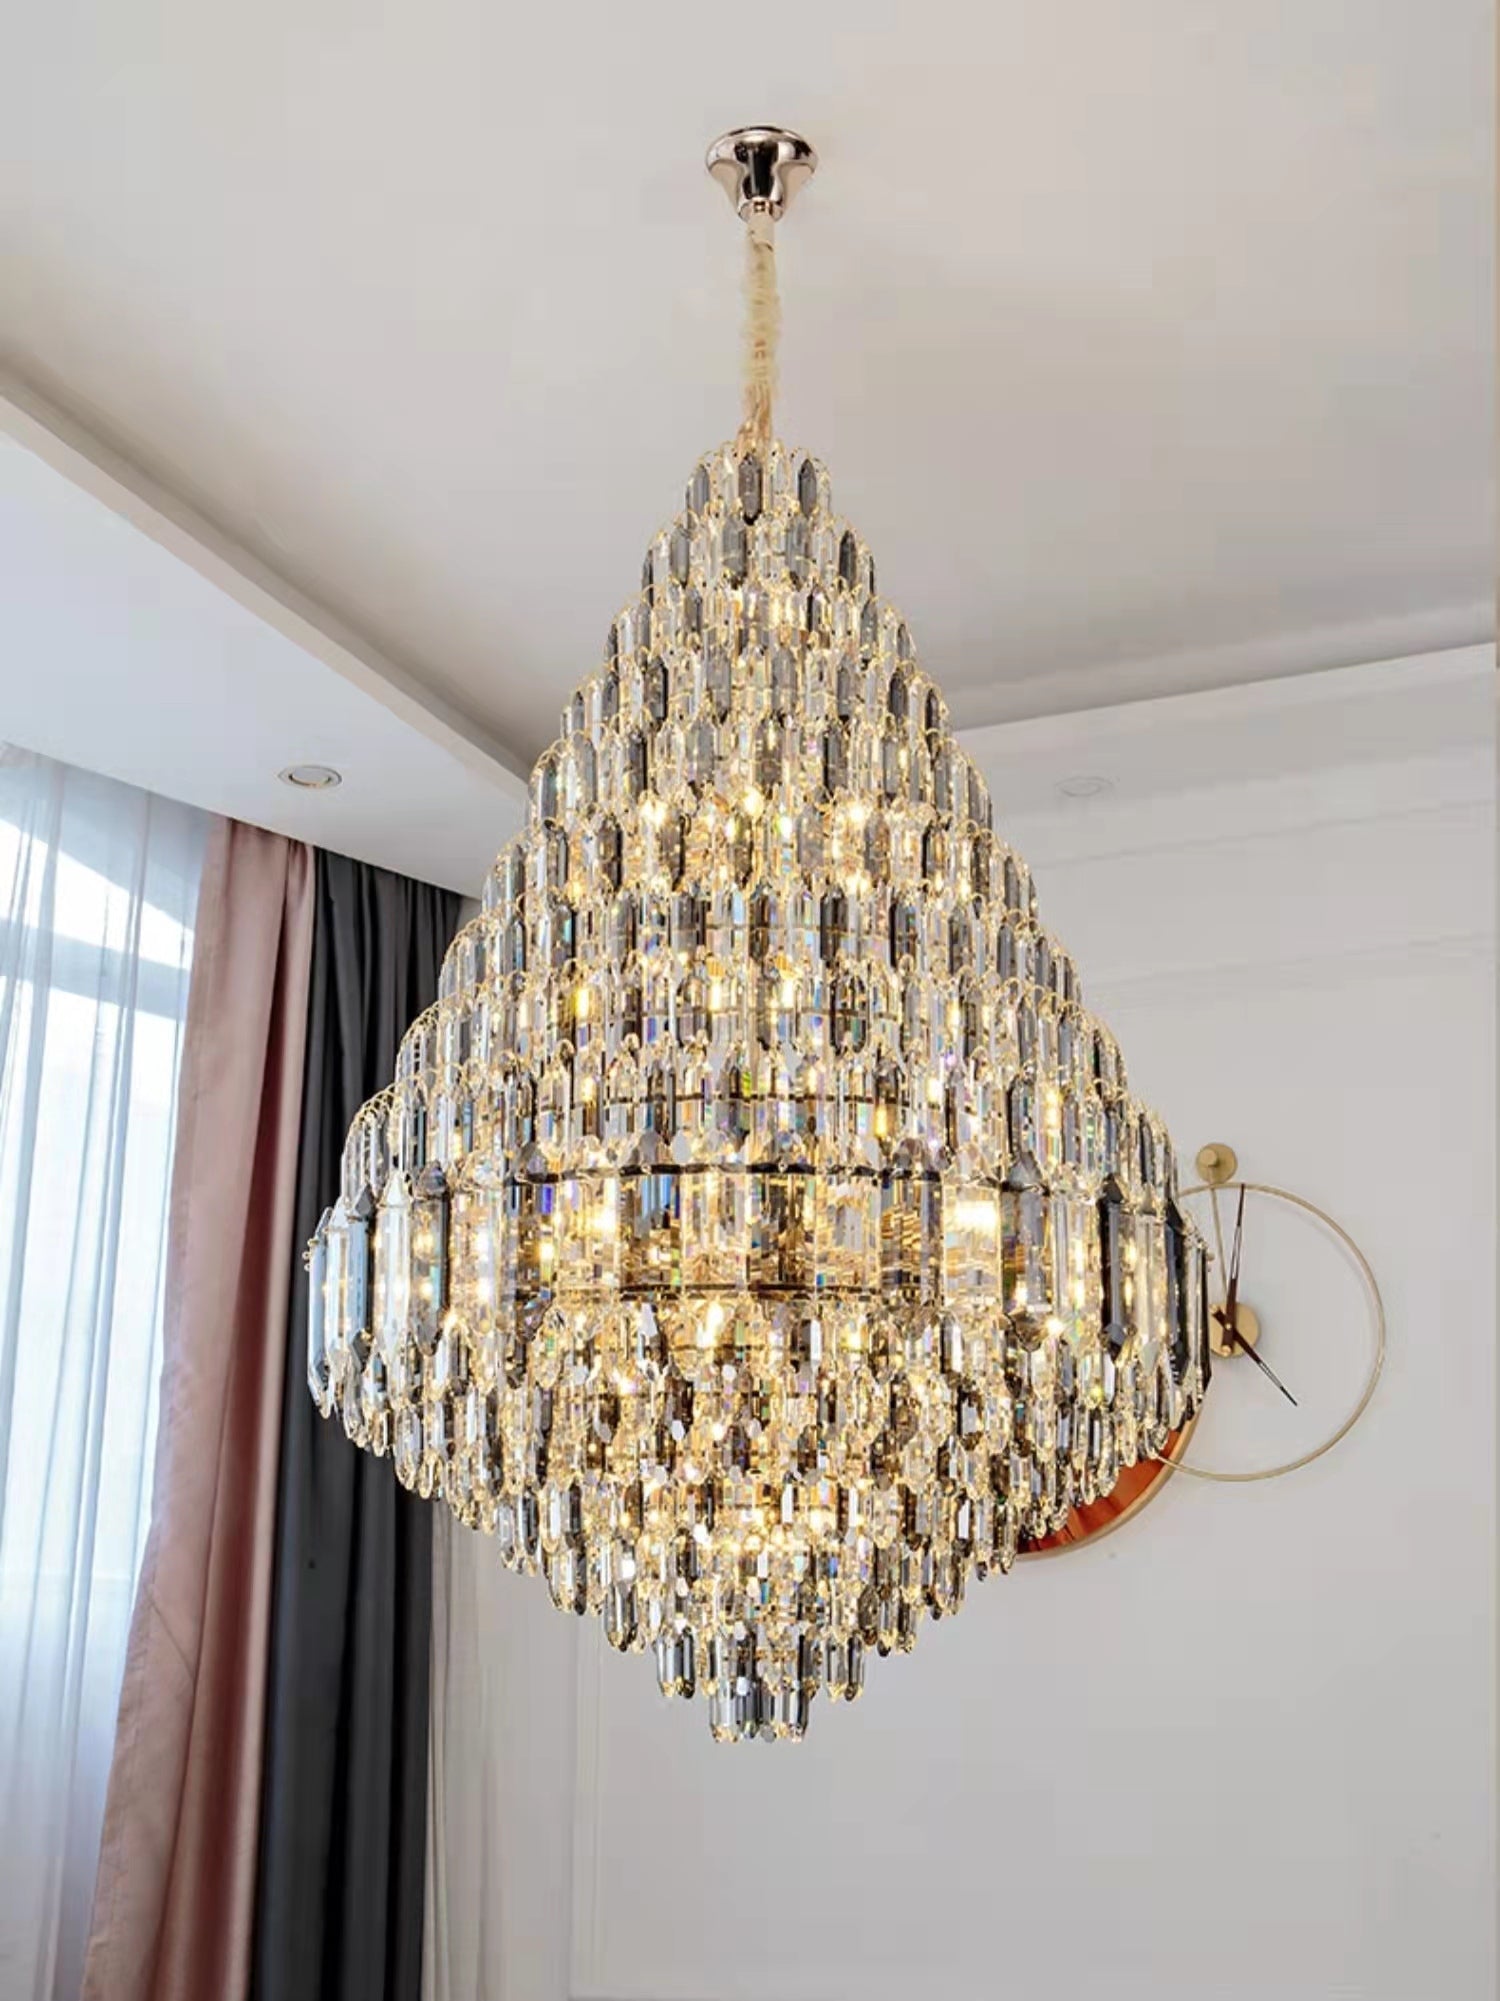 Extra Length D47.2”*H70.9” Luxurious Modern Chandeliers For Hotel Lobby Hallway Foyer / Staircase Living Room